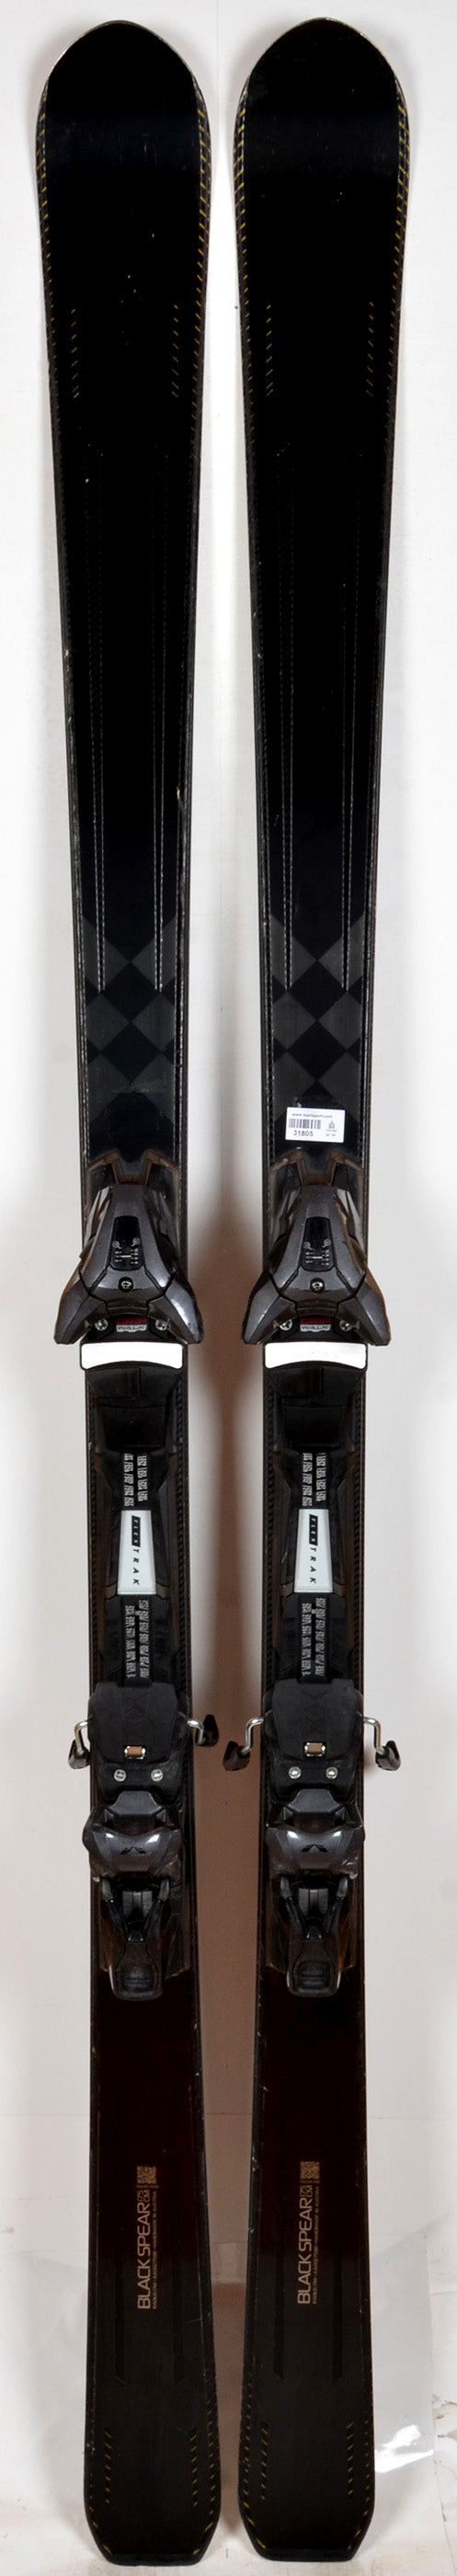 Volant BLACK SPEAR grey - skis d'occasion